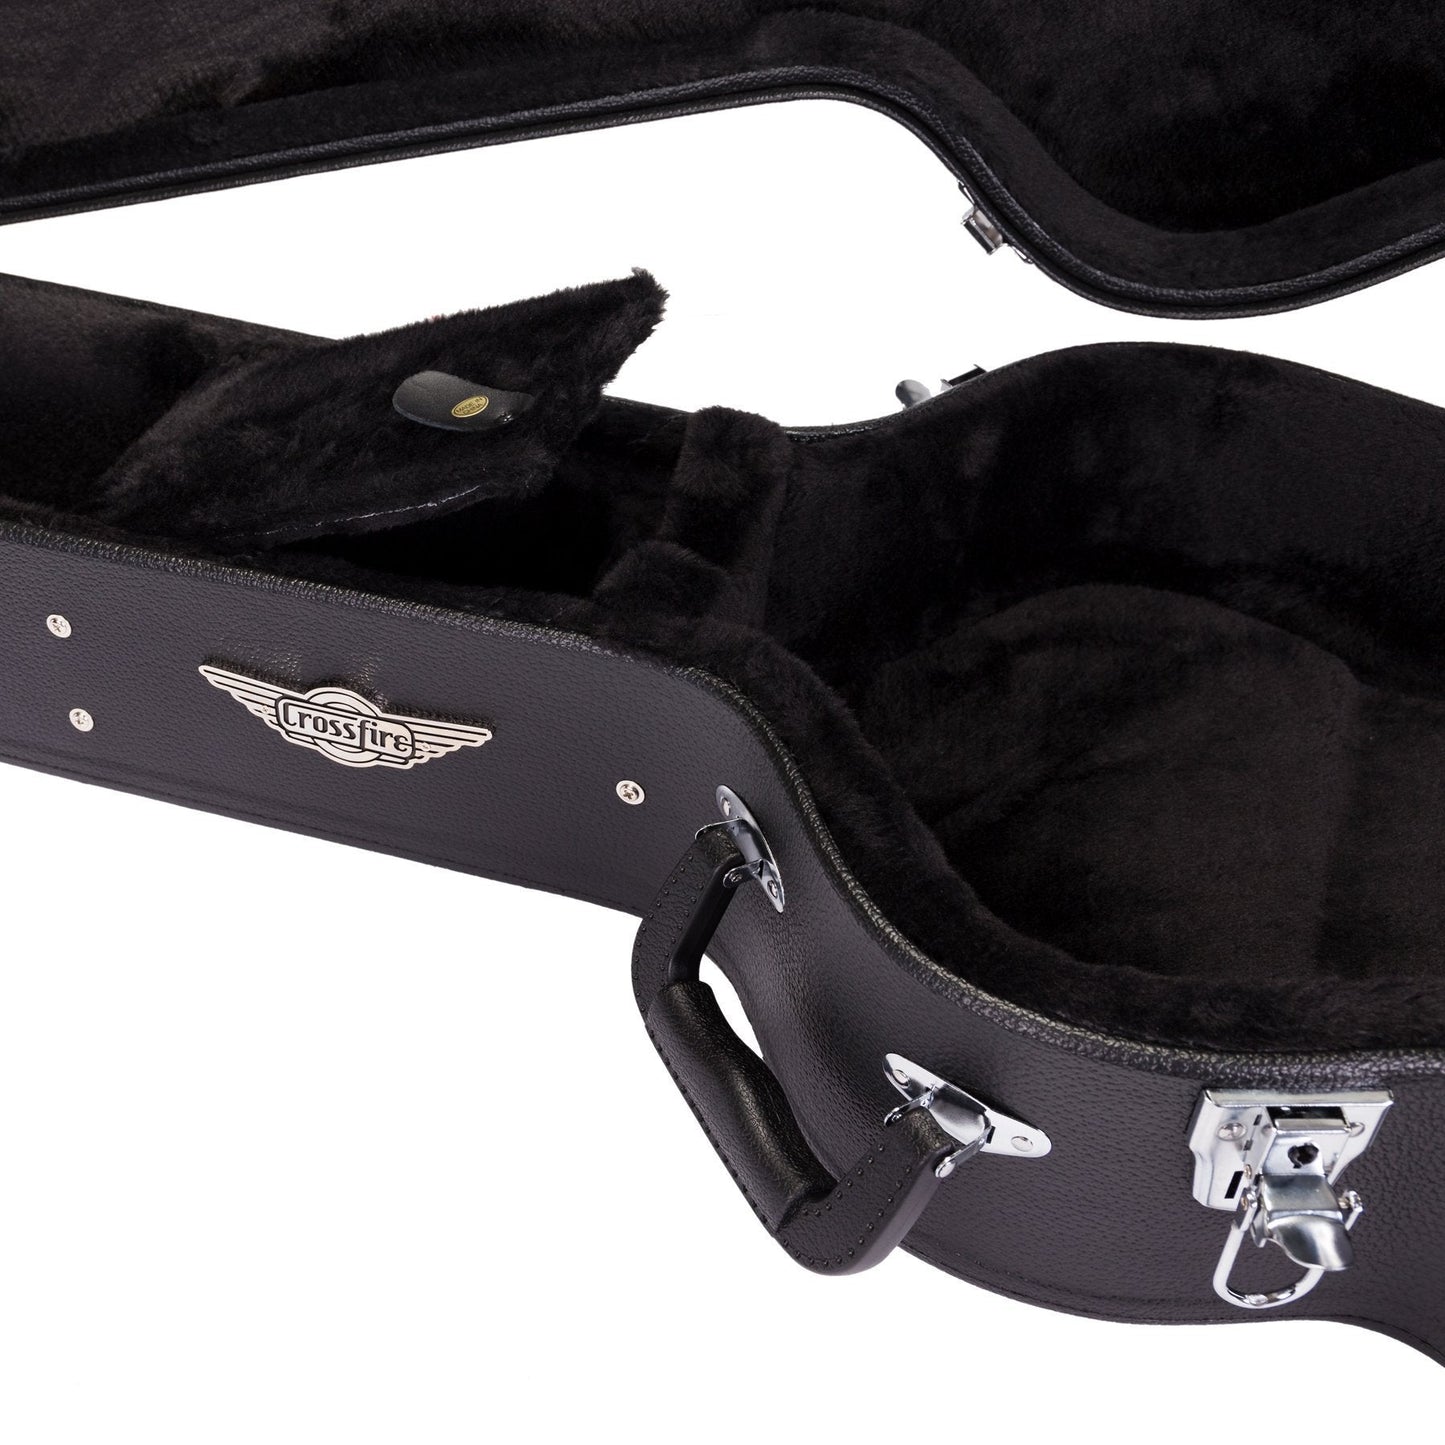 Crossfire Standard Shaped Small Body Acoustic Guitar Hard Case (Black)